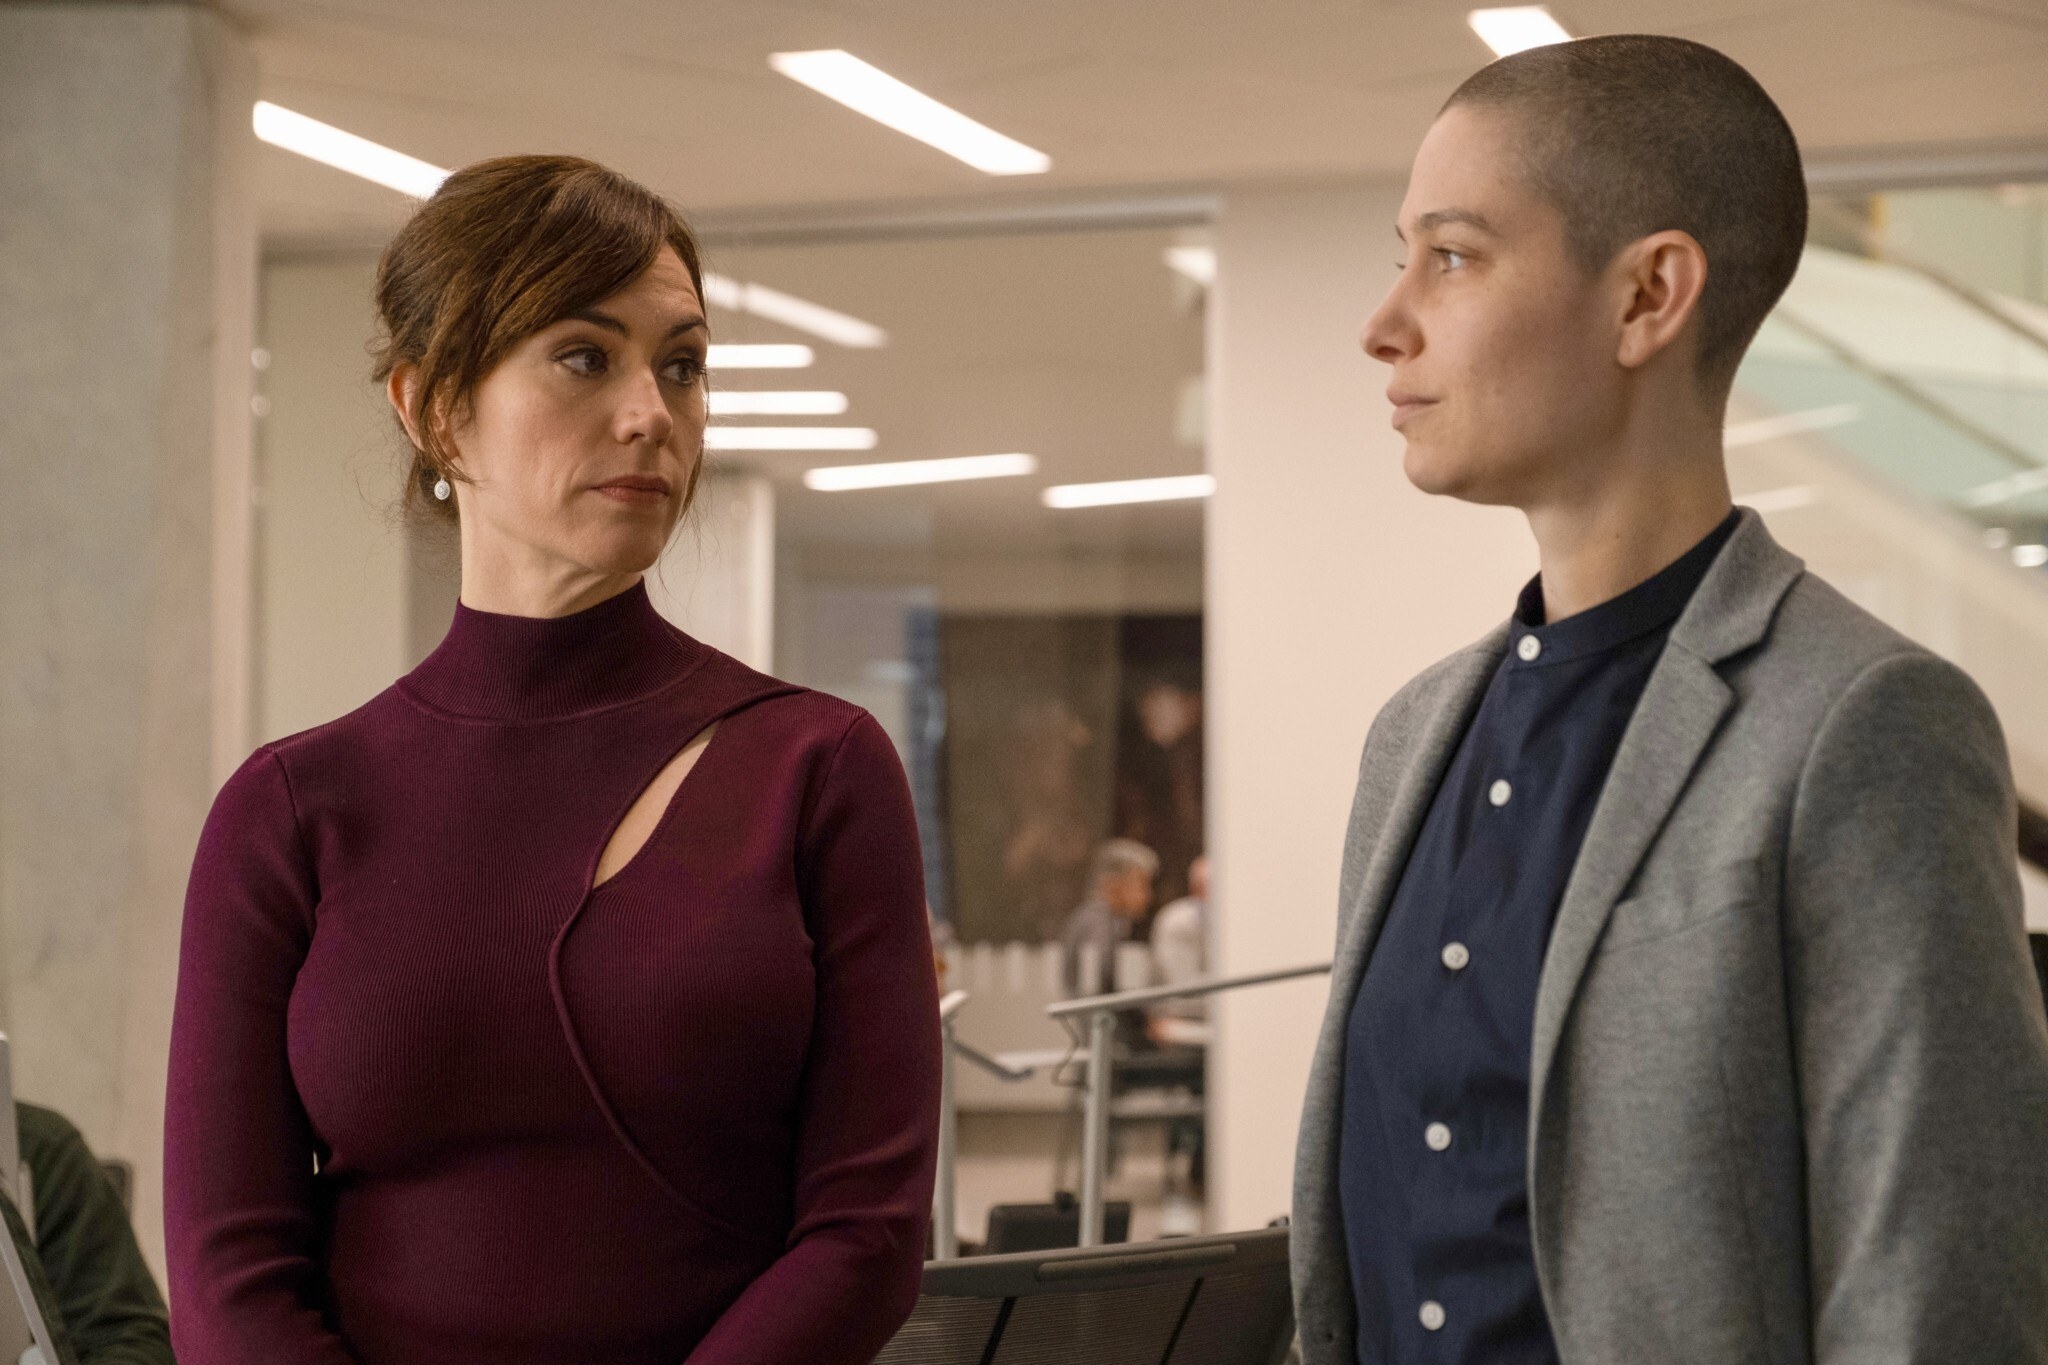 Maggie Siff and Asia Kate Dillon look at each other in an office